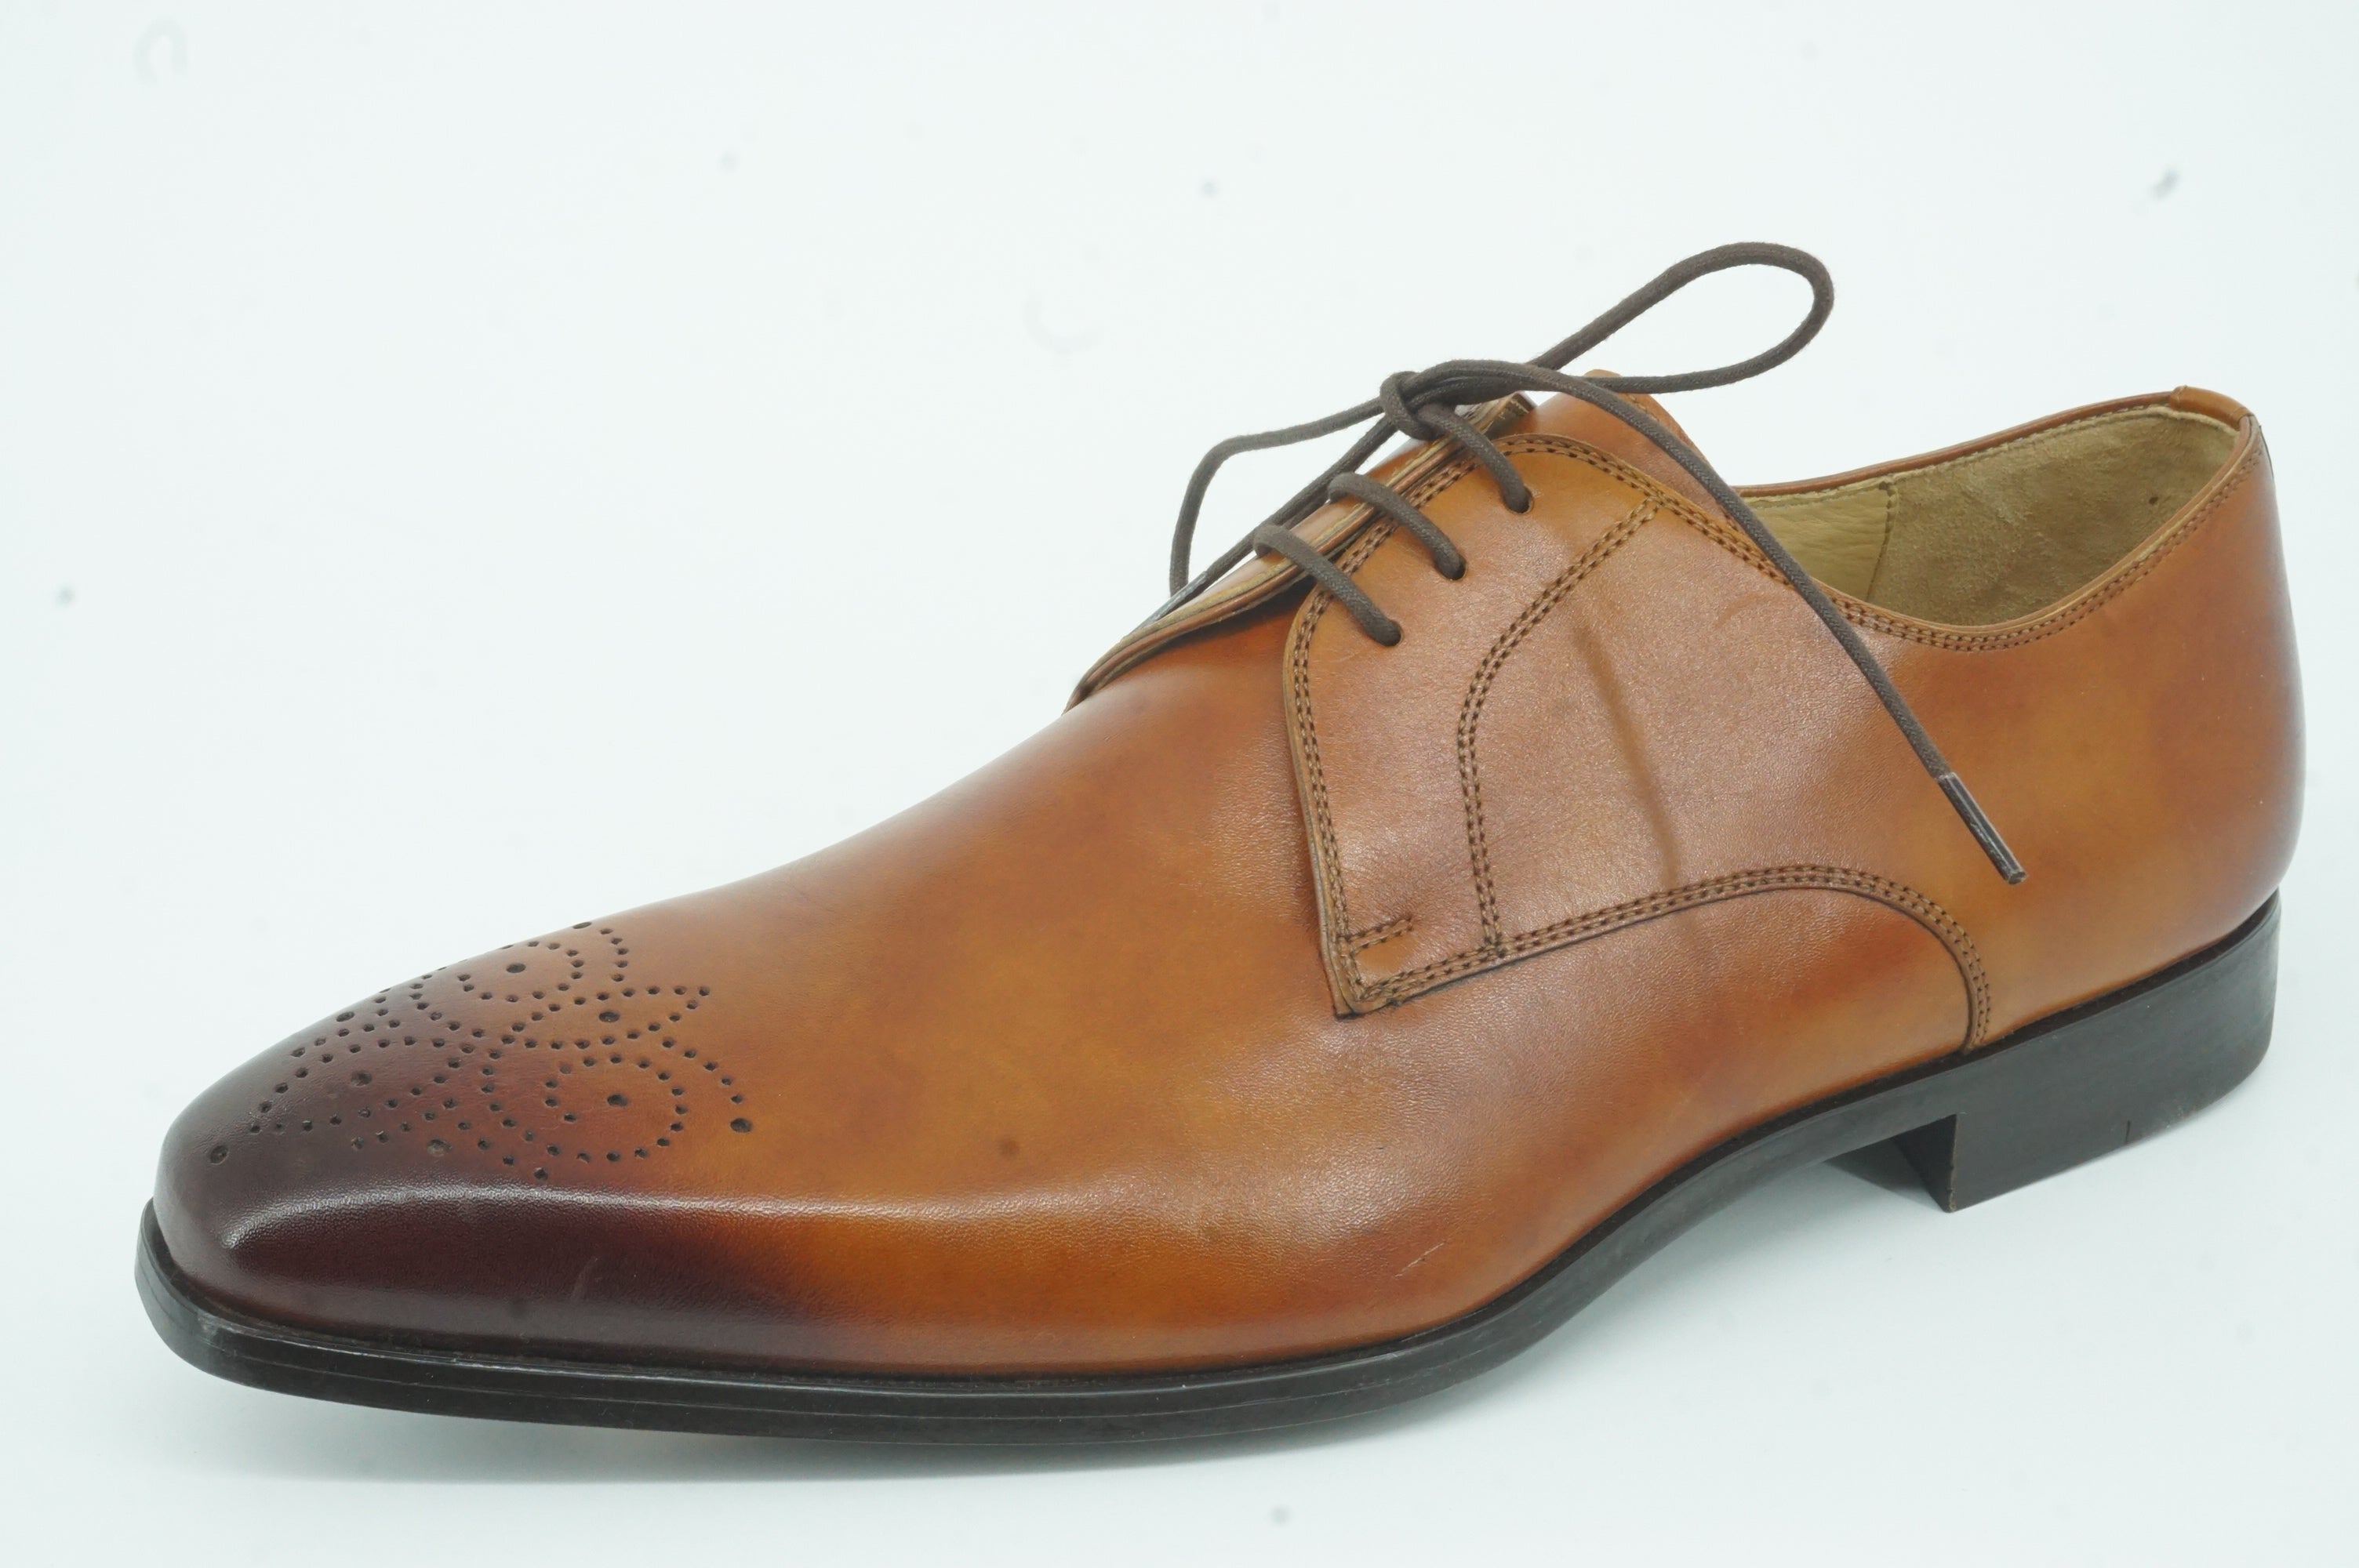 Magnanni Samuel Perforated Toe Oxford Derby Dress Shoes Size 8.5 Brown $395